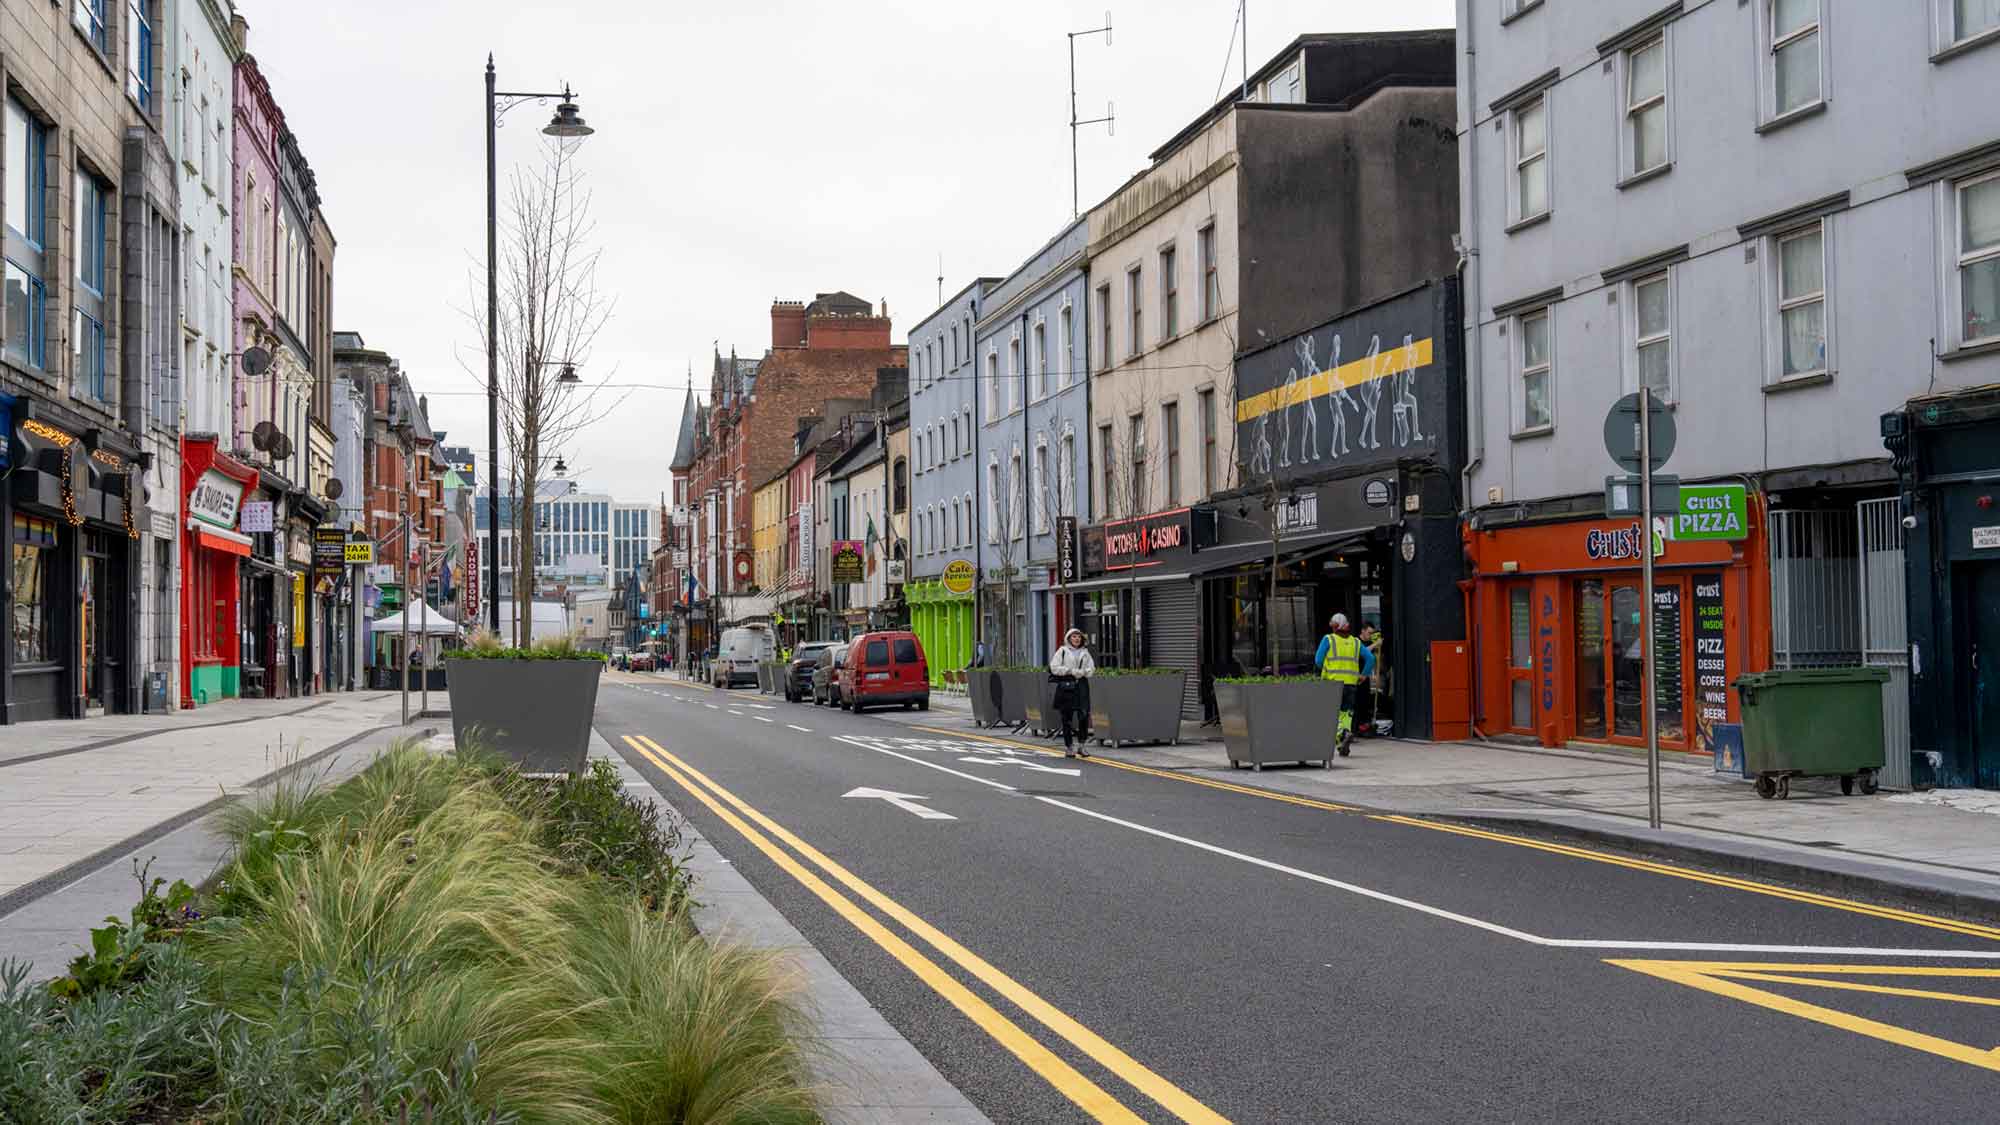 Photograph of the MacCurtain Street Public Transport Improvement Scheme showing two-way traffic, widened pedestrian footpaths and new greenery.